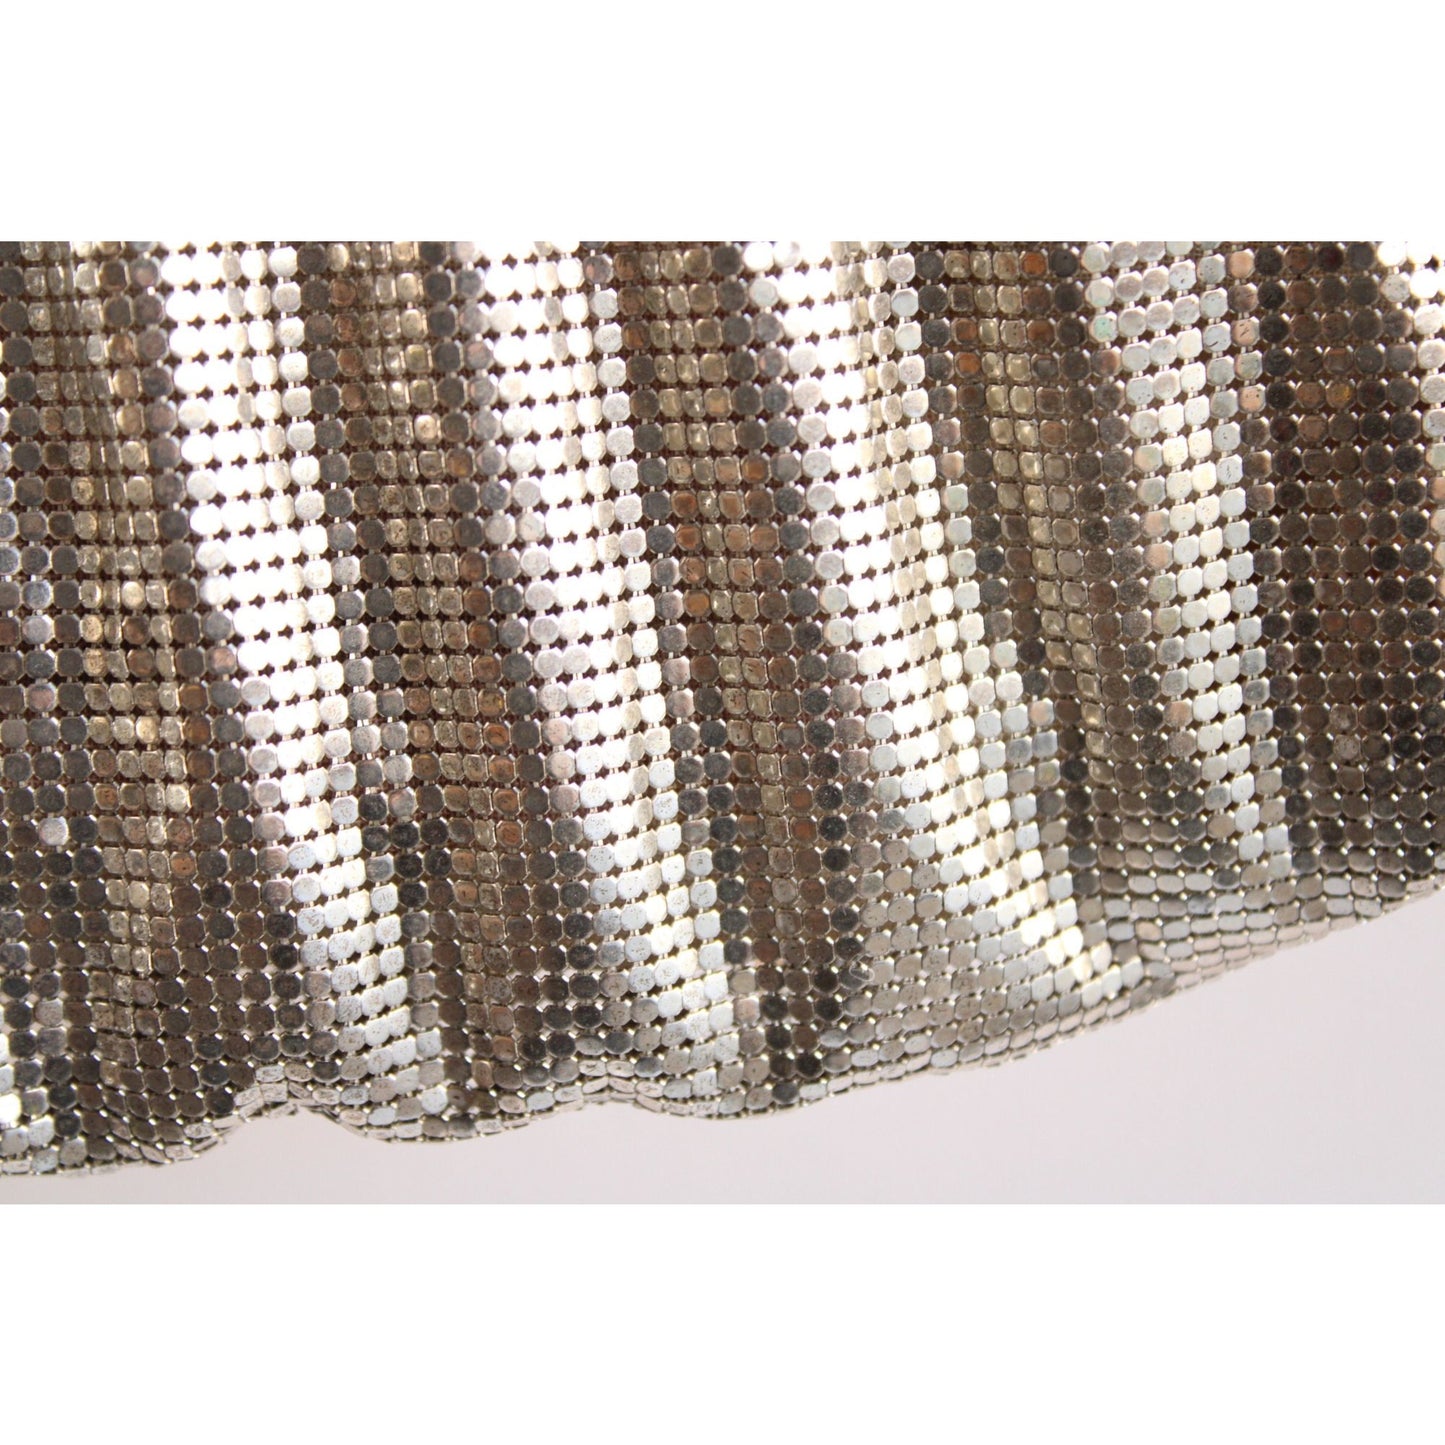 Vintage 1930s 1940s Silver Mesh Clutch by Whiting & Davis